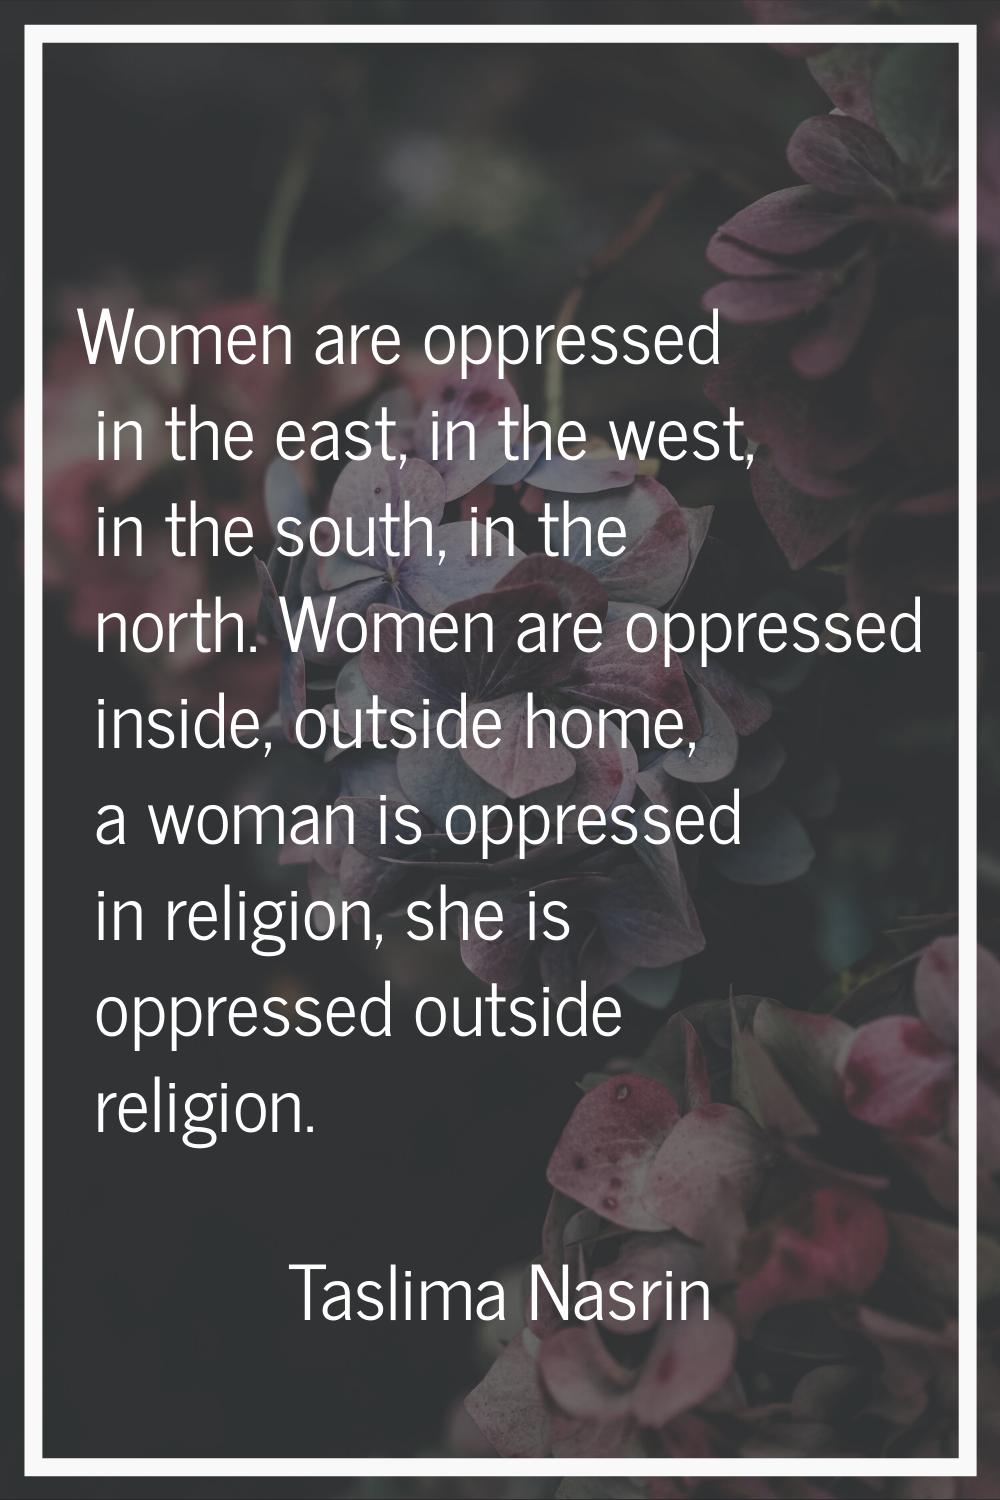 Women are oppressed in the east, in the west, in the south, in the north. Women are oppressed insid